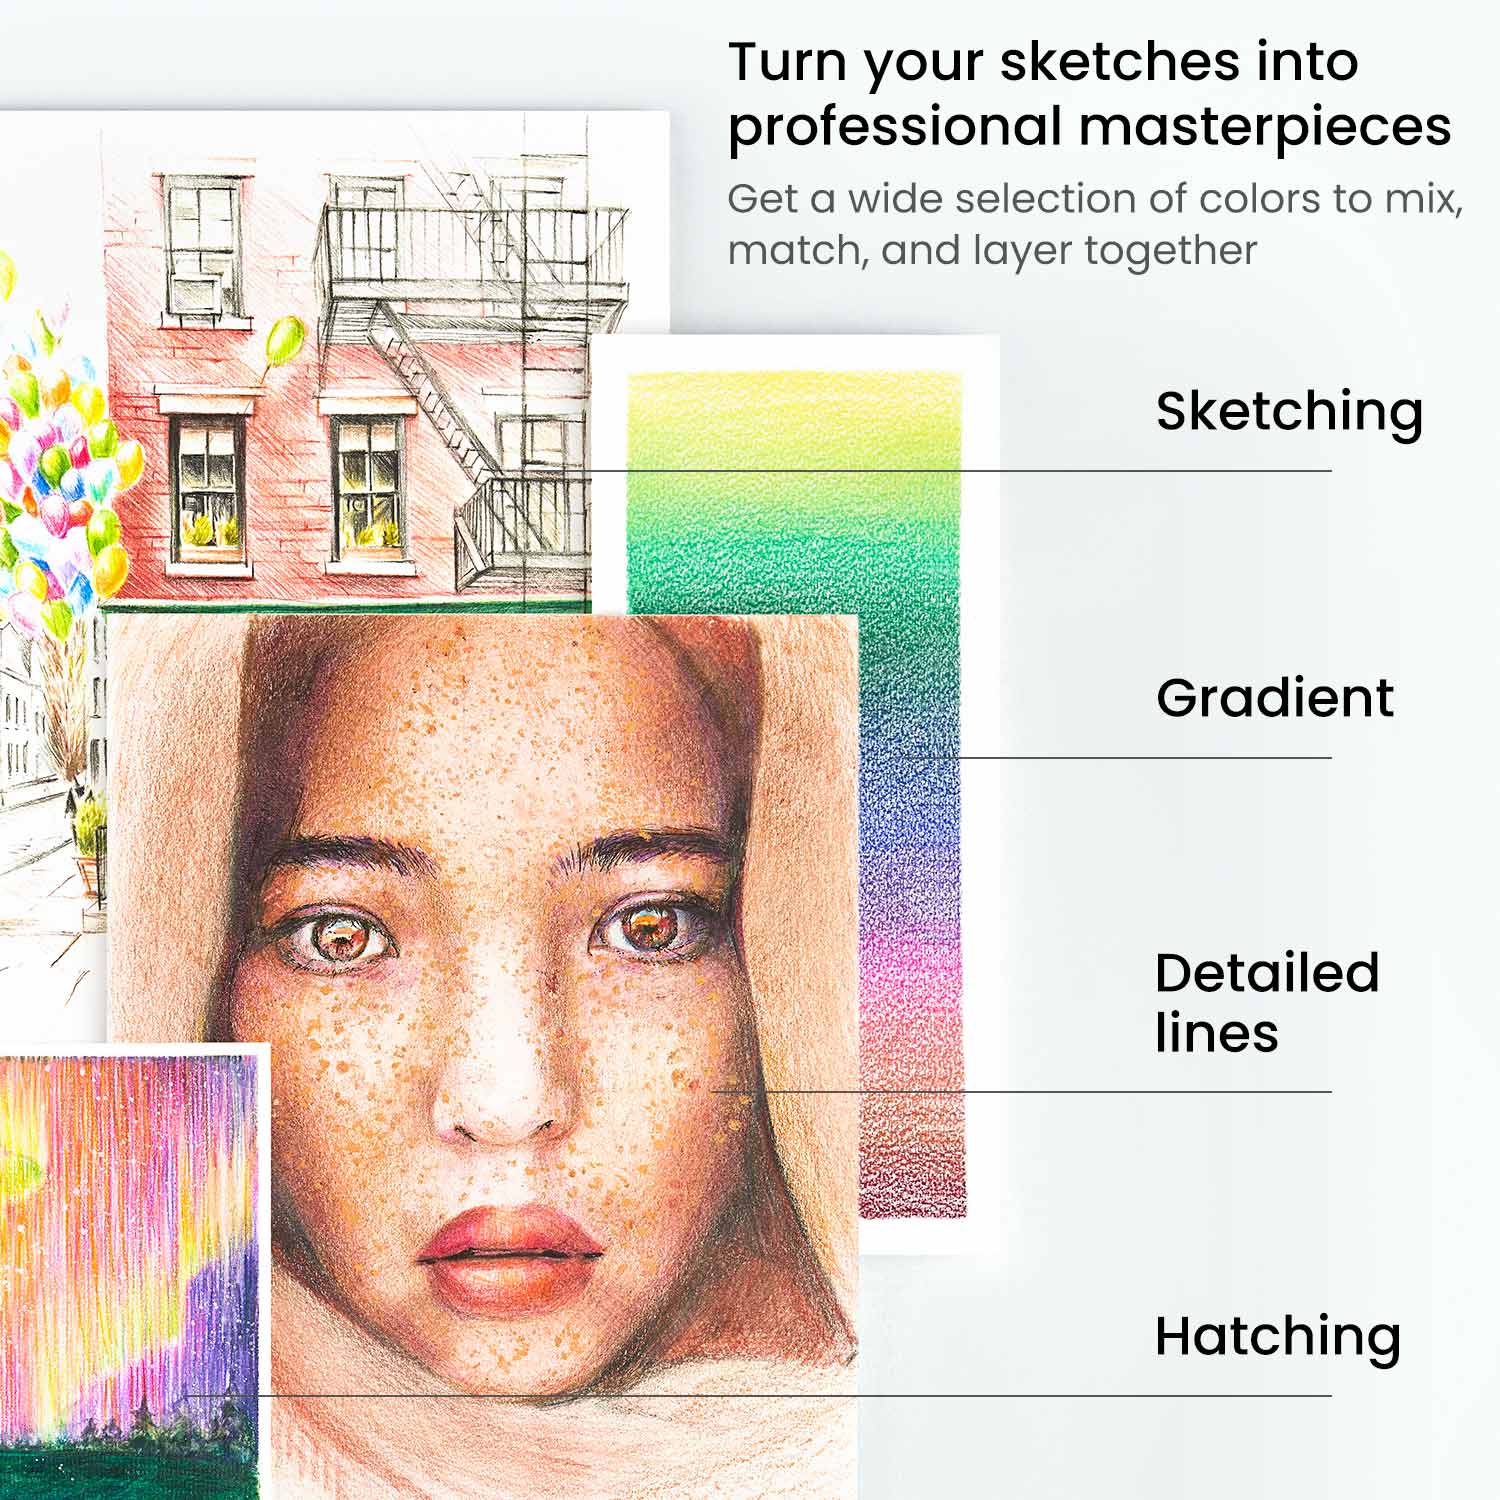 How to Create a Smooth Gradient with Colored Pencils